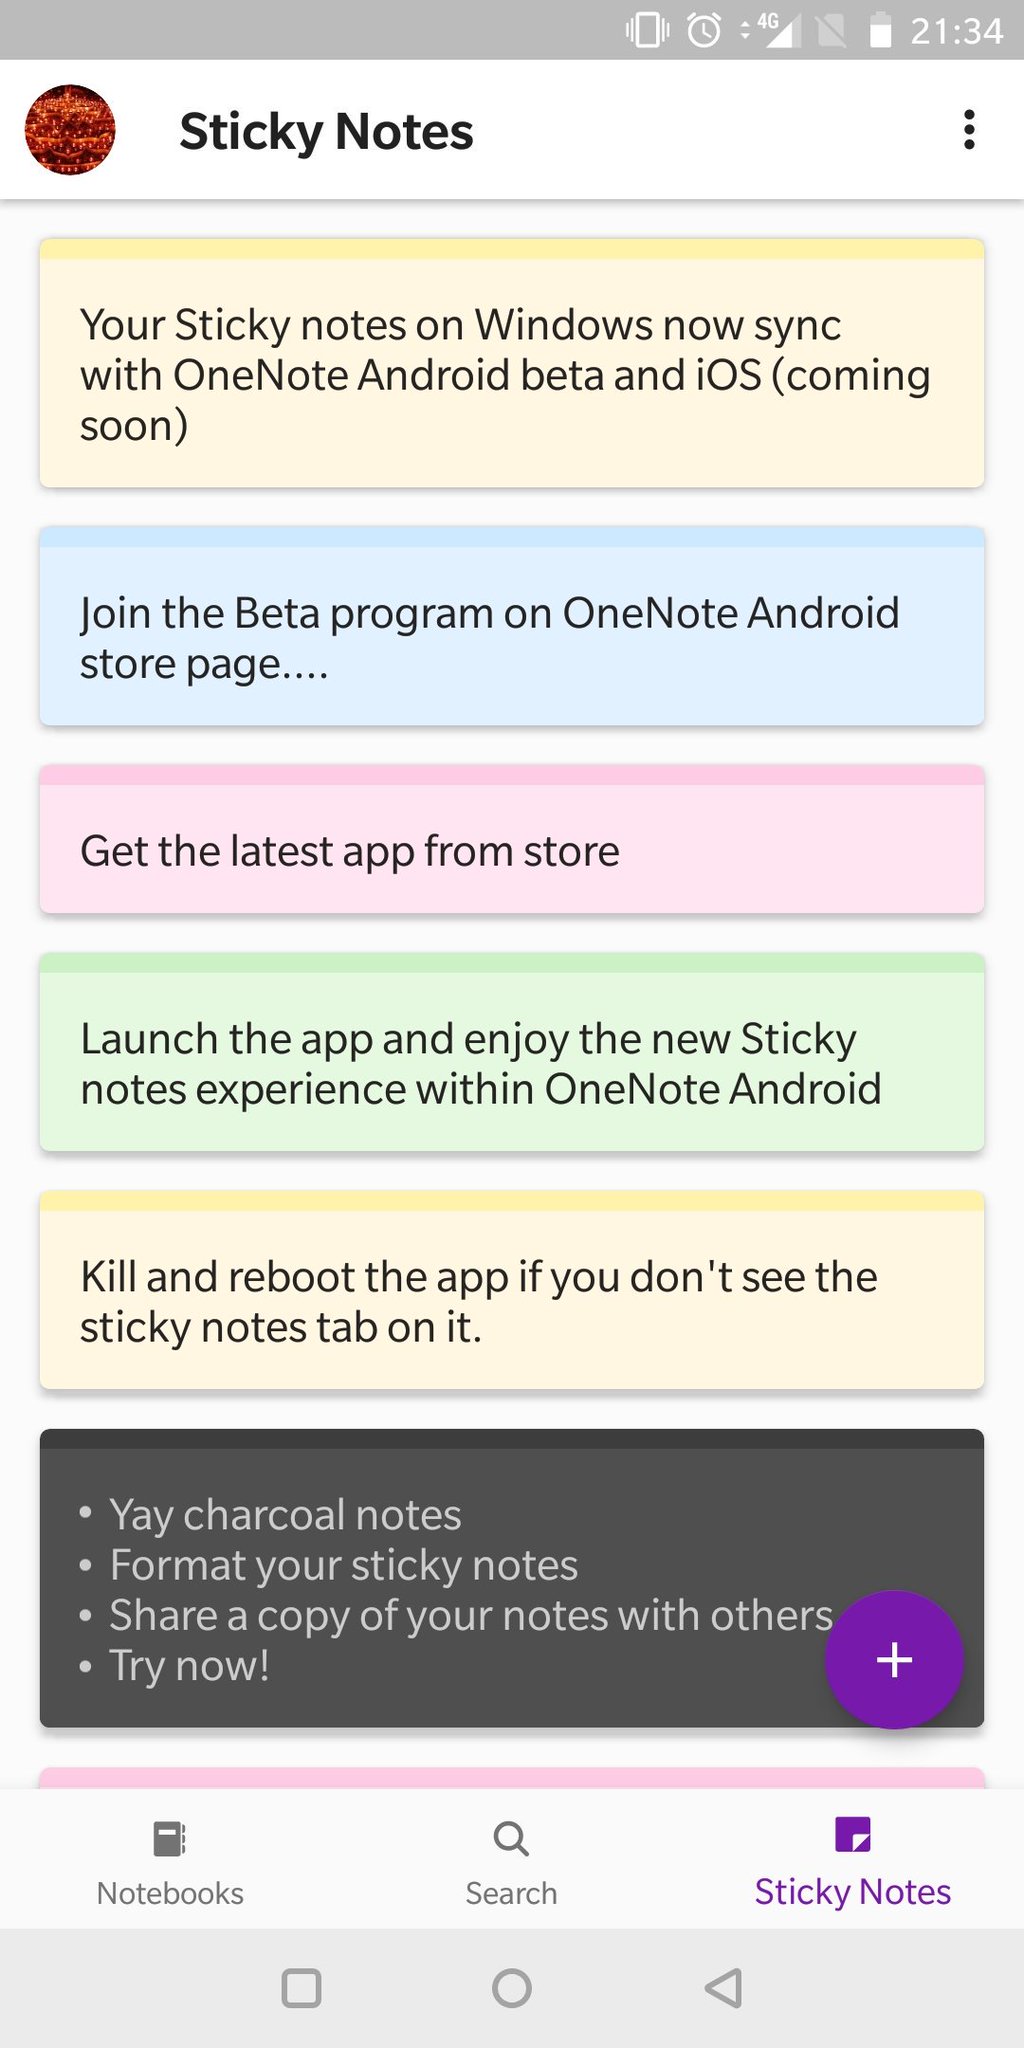 Amrita Rout on Twitter: "Howdy Your @stickynotes from Windows now sync OneNote Android Beta. Go try it now and absolutely let us know your feedback!!!! We are so excited about